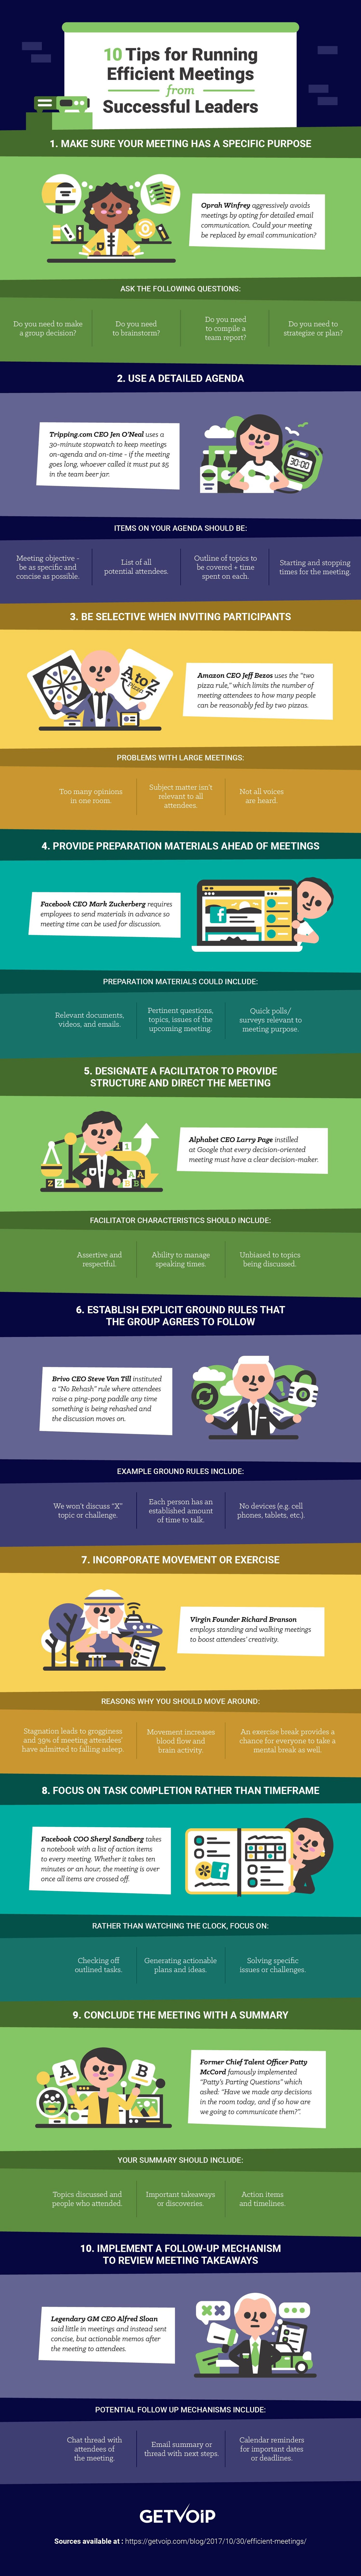 10 Tips for Efficient Meetings from Successful Leaders [Infographic]